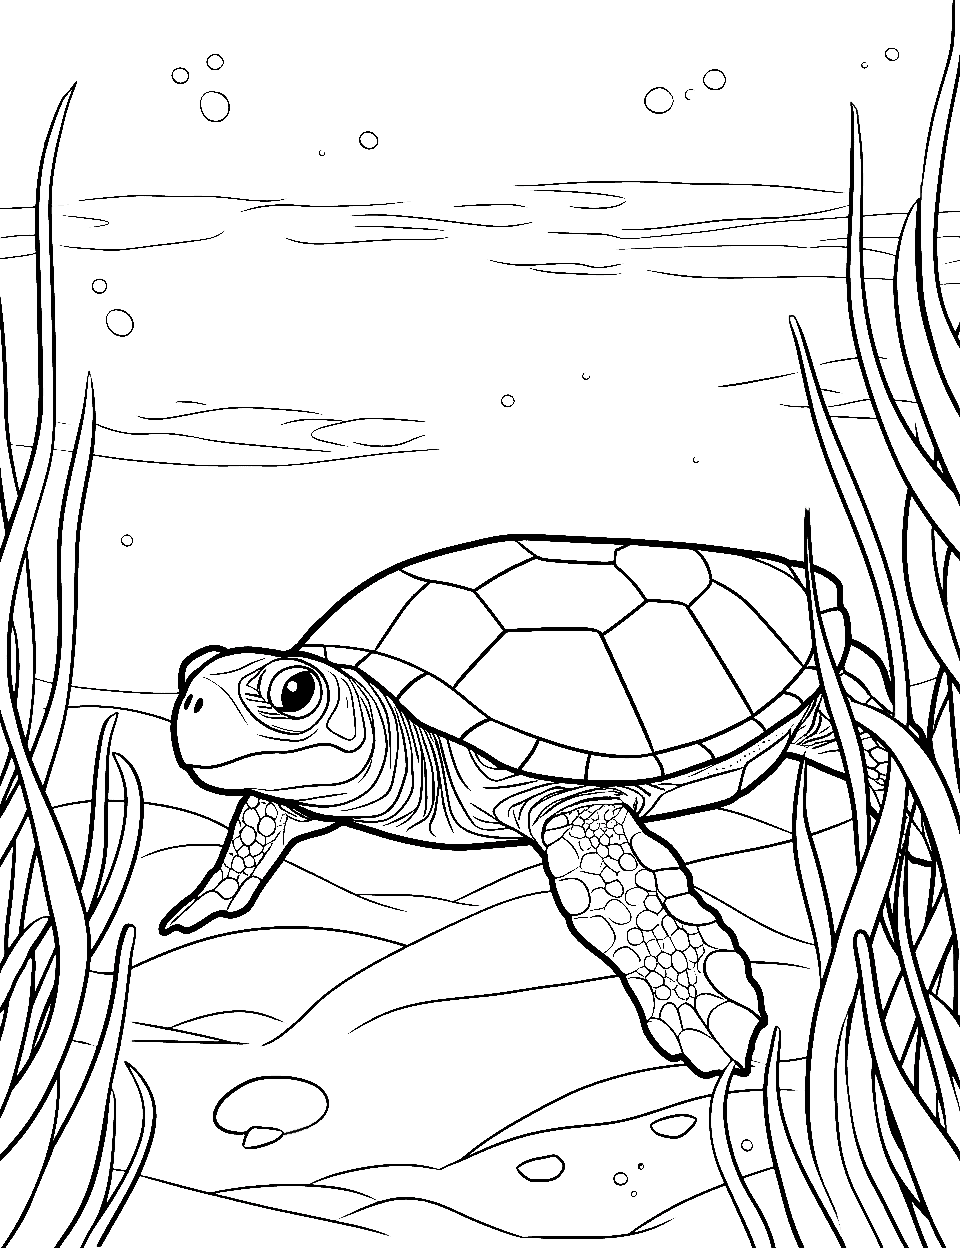 Hidden Turtle Coloring Page - A turtle peeking out from under a leaf in water.